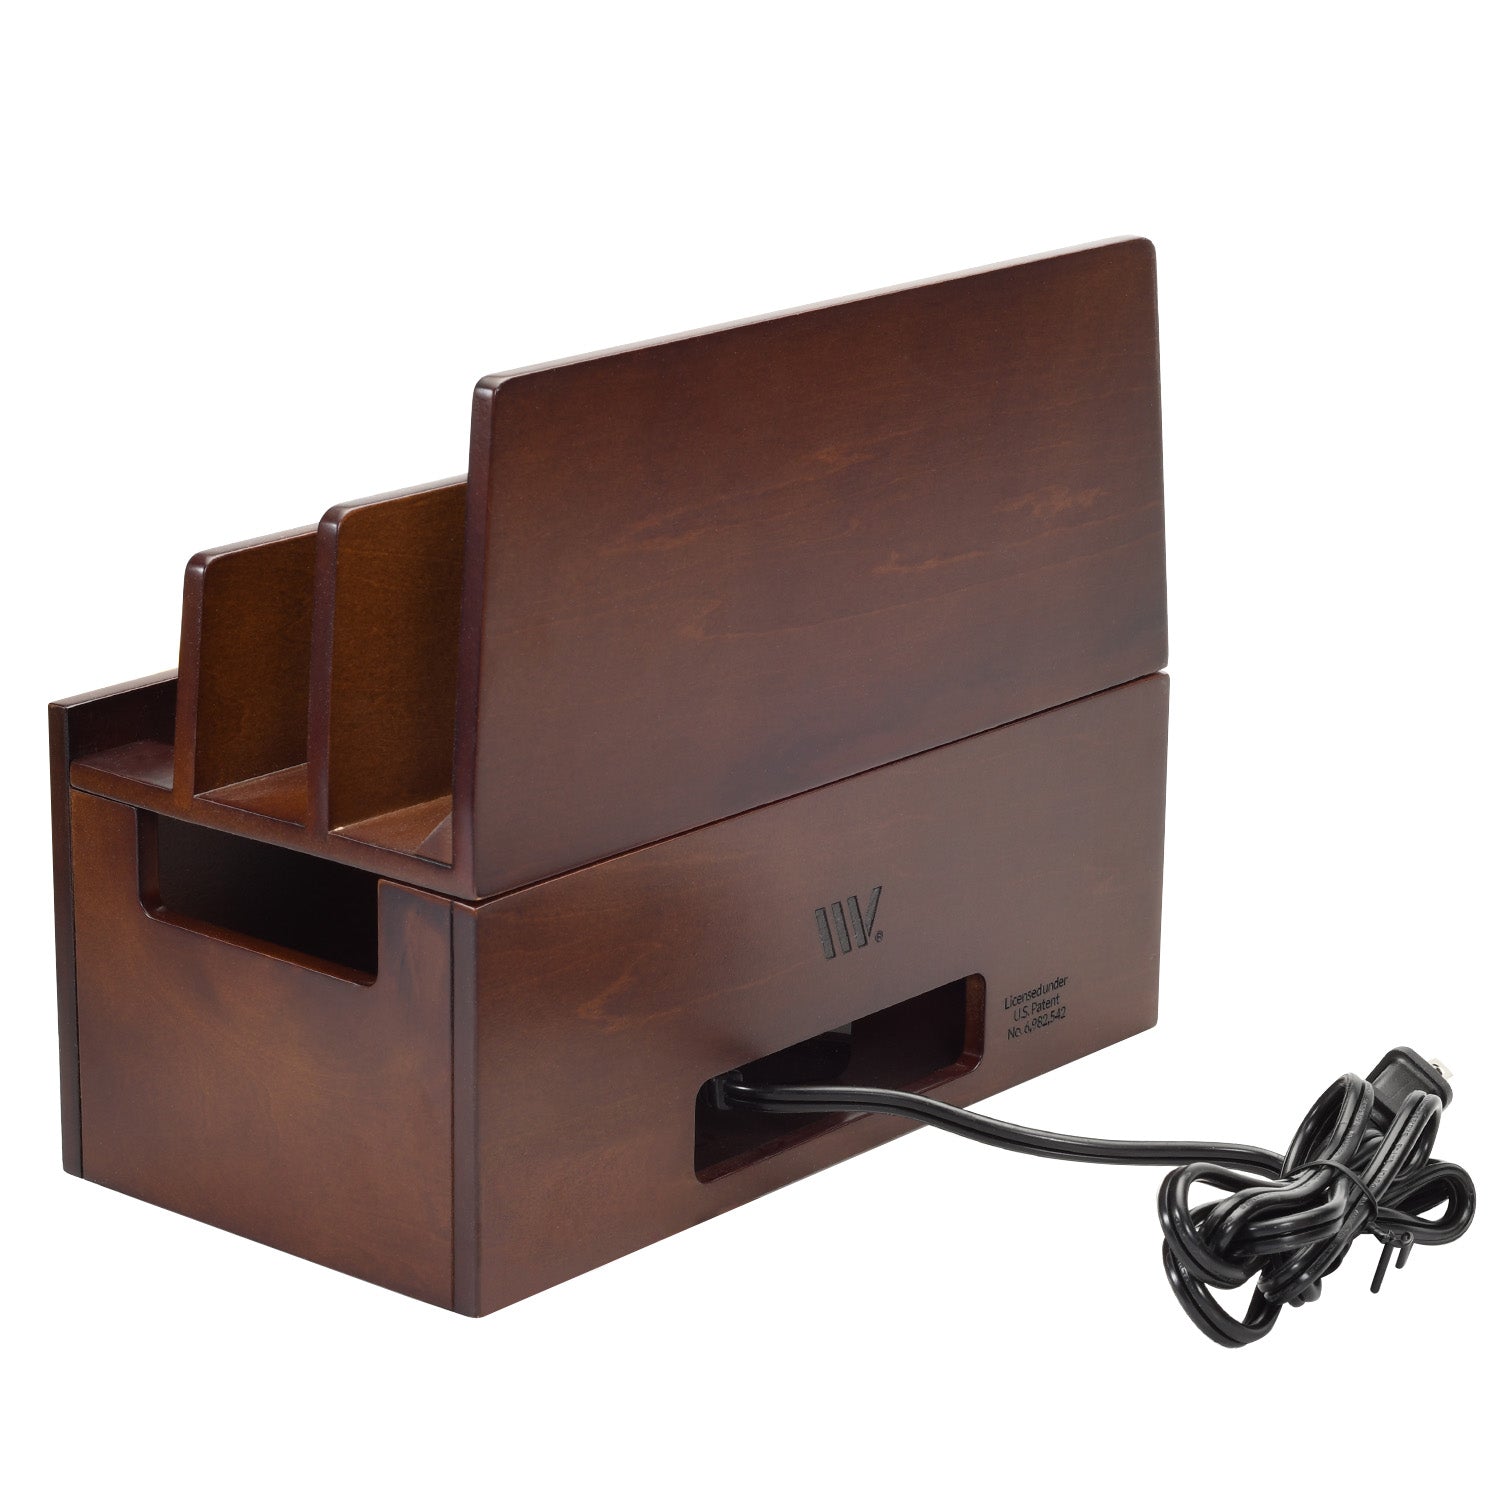 Classic Wood Charging Station & Powermod 5 USB Charger Combo